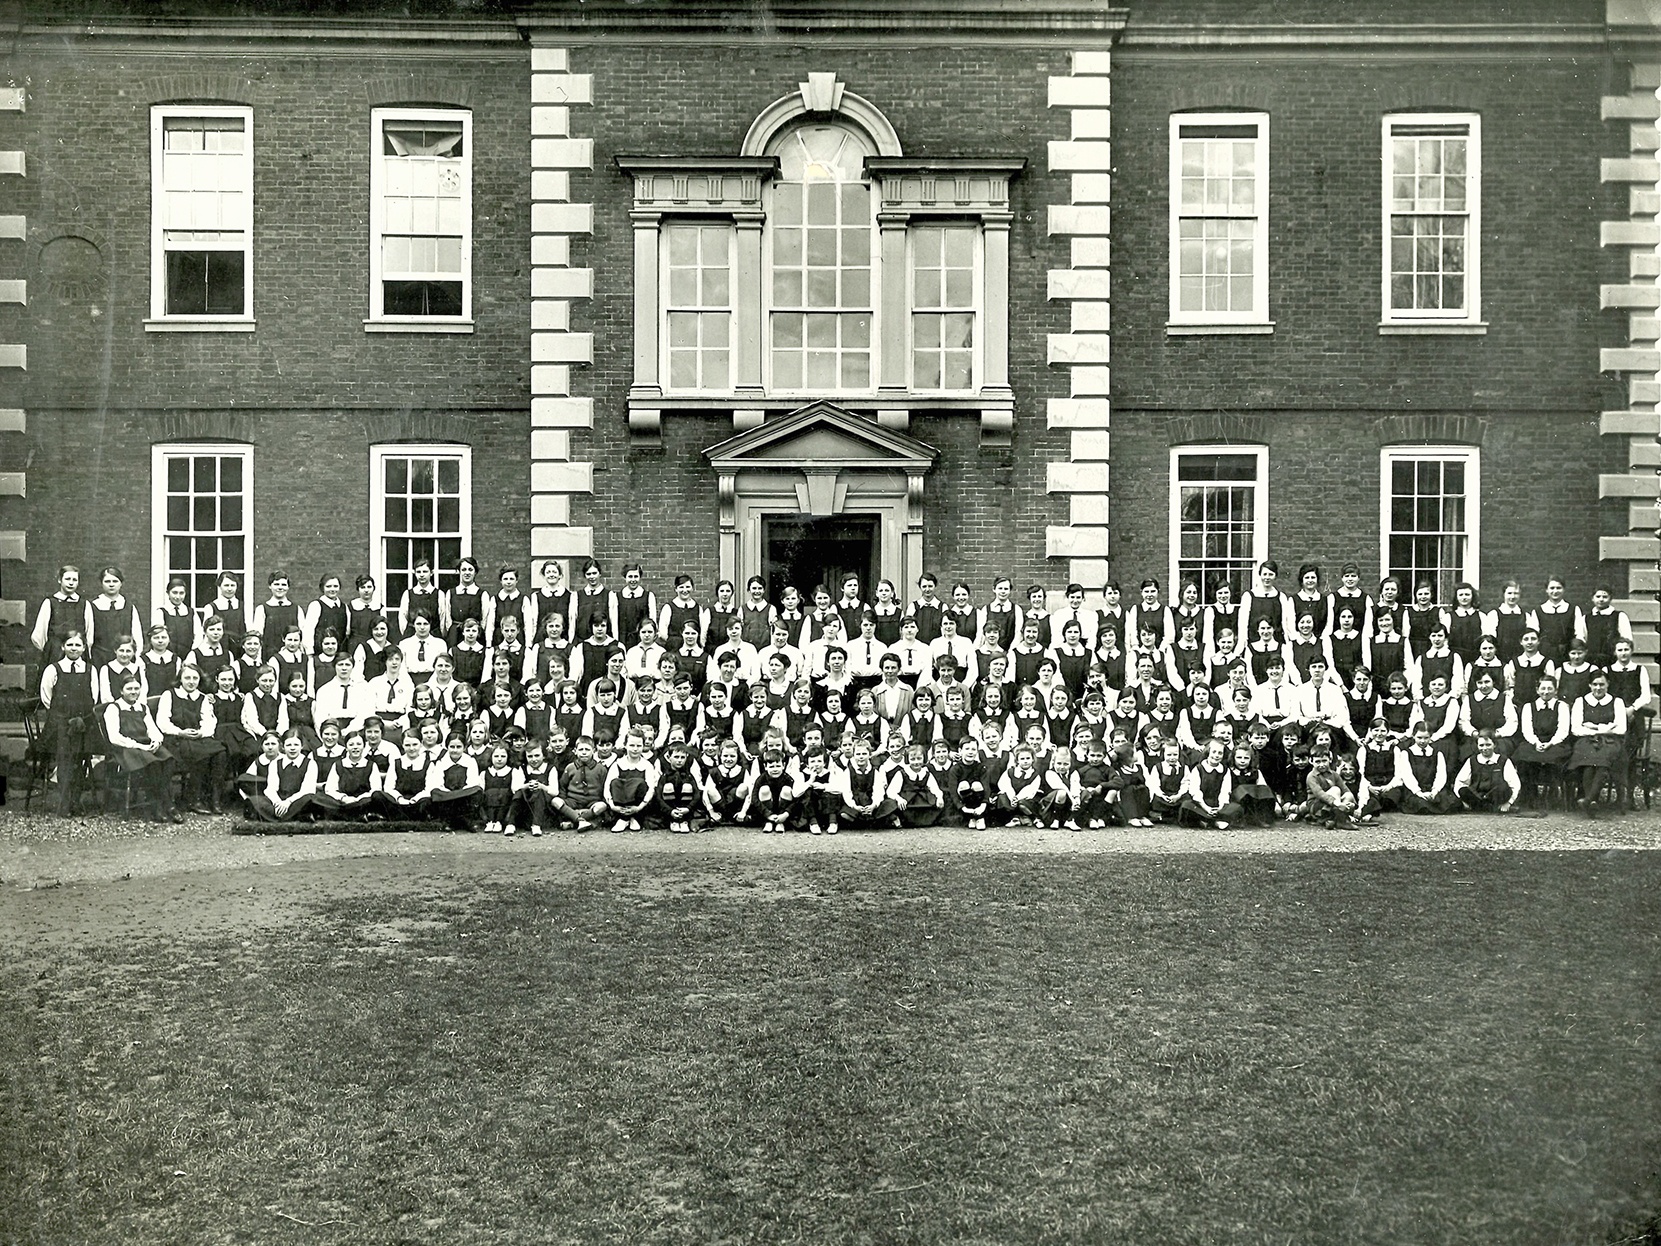 Yeomanry House in 1920